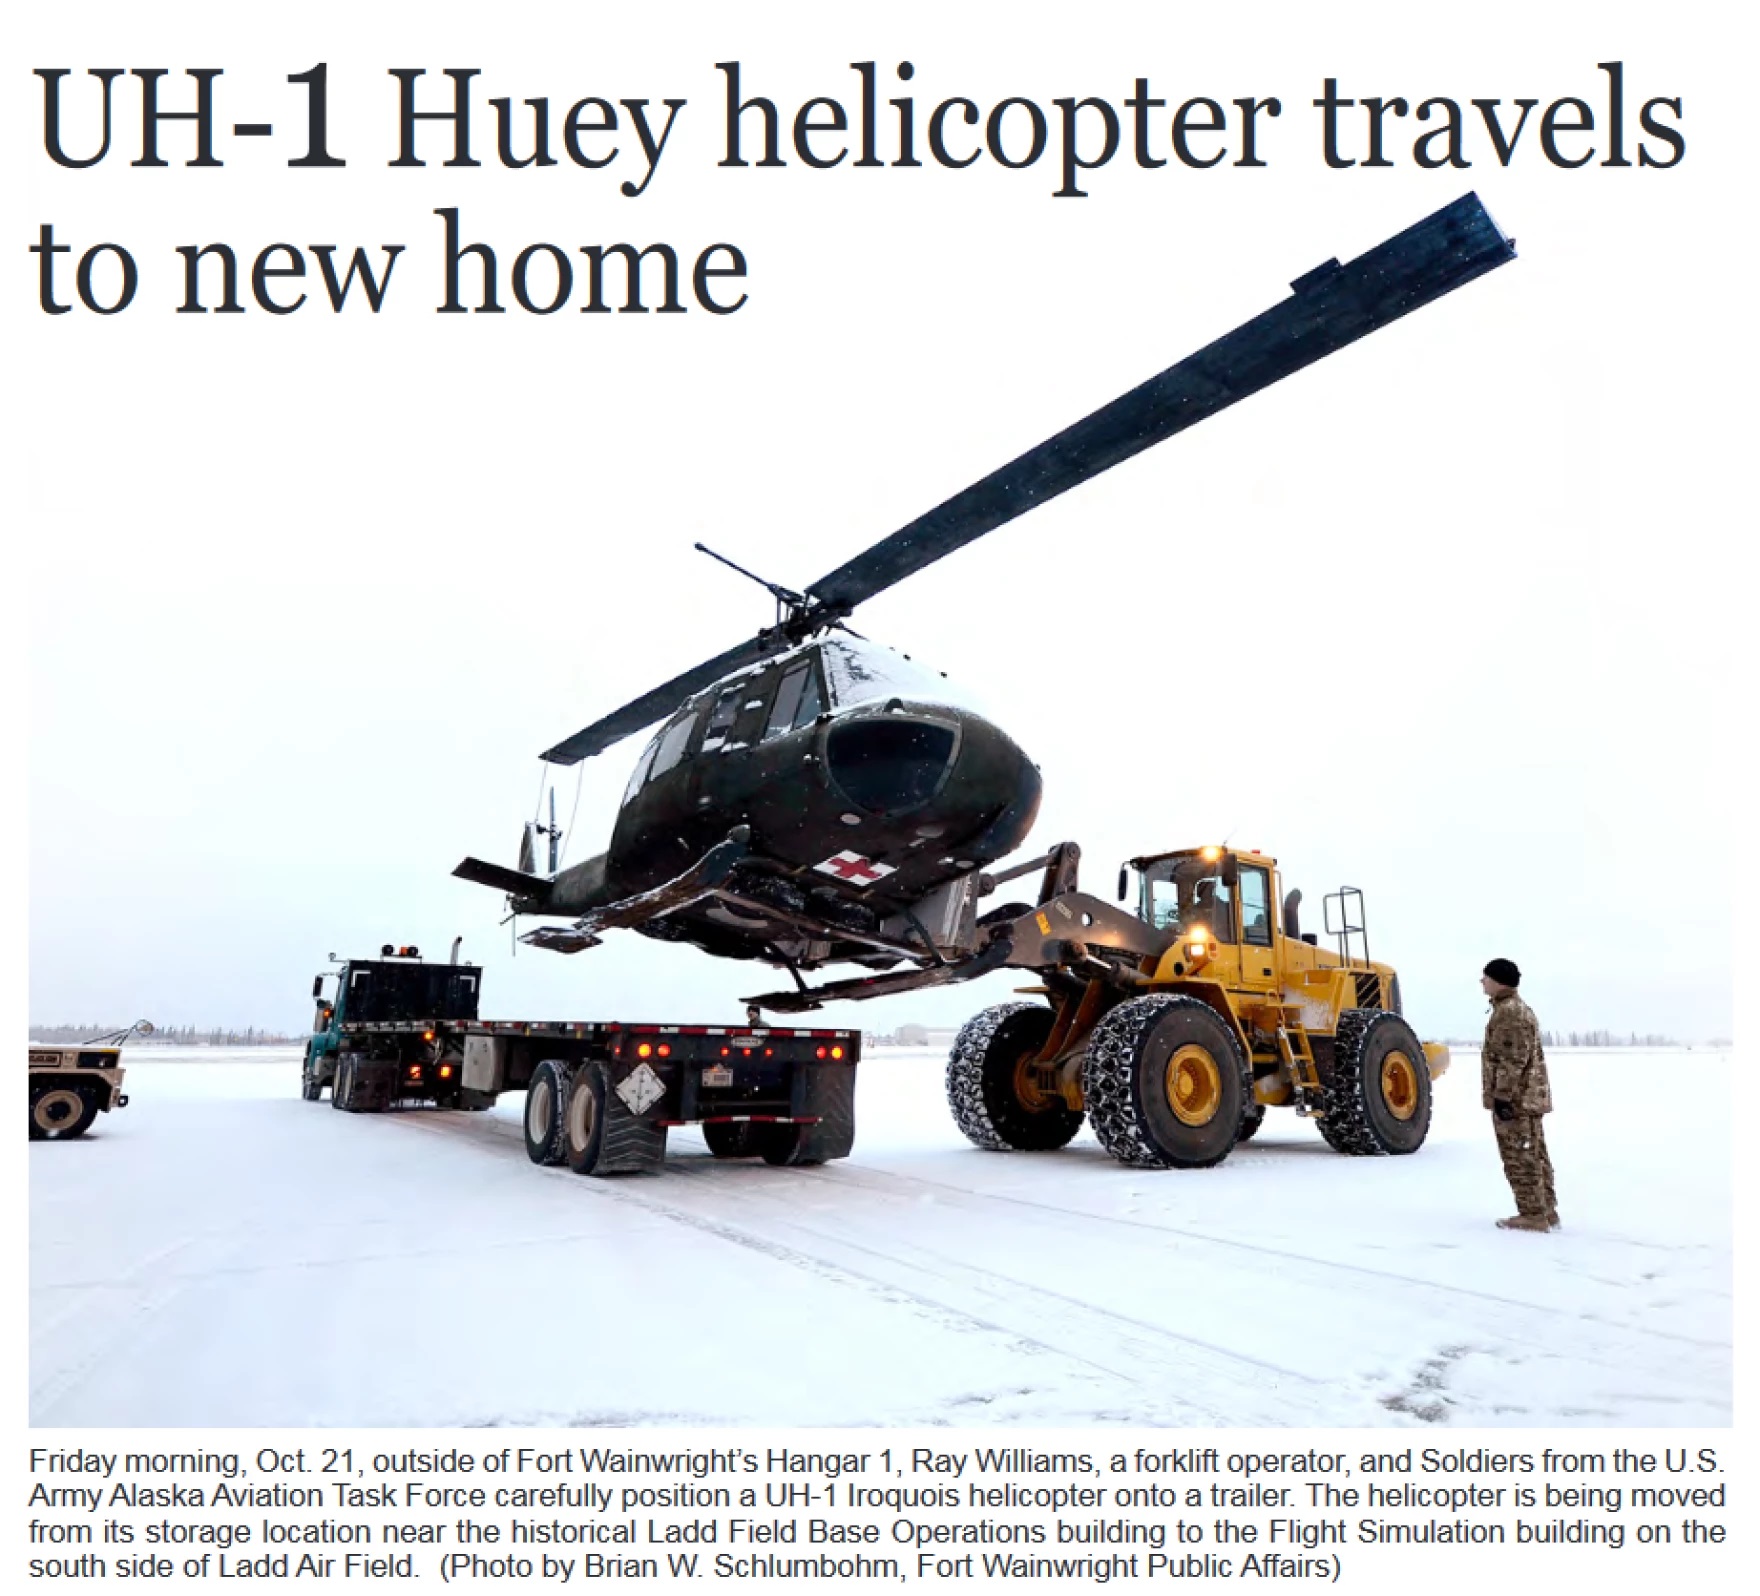 an army story on a huey helicopter